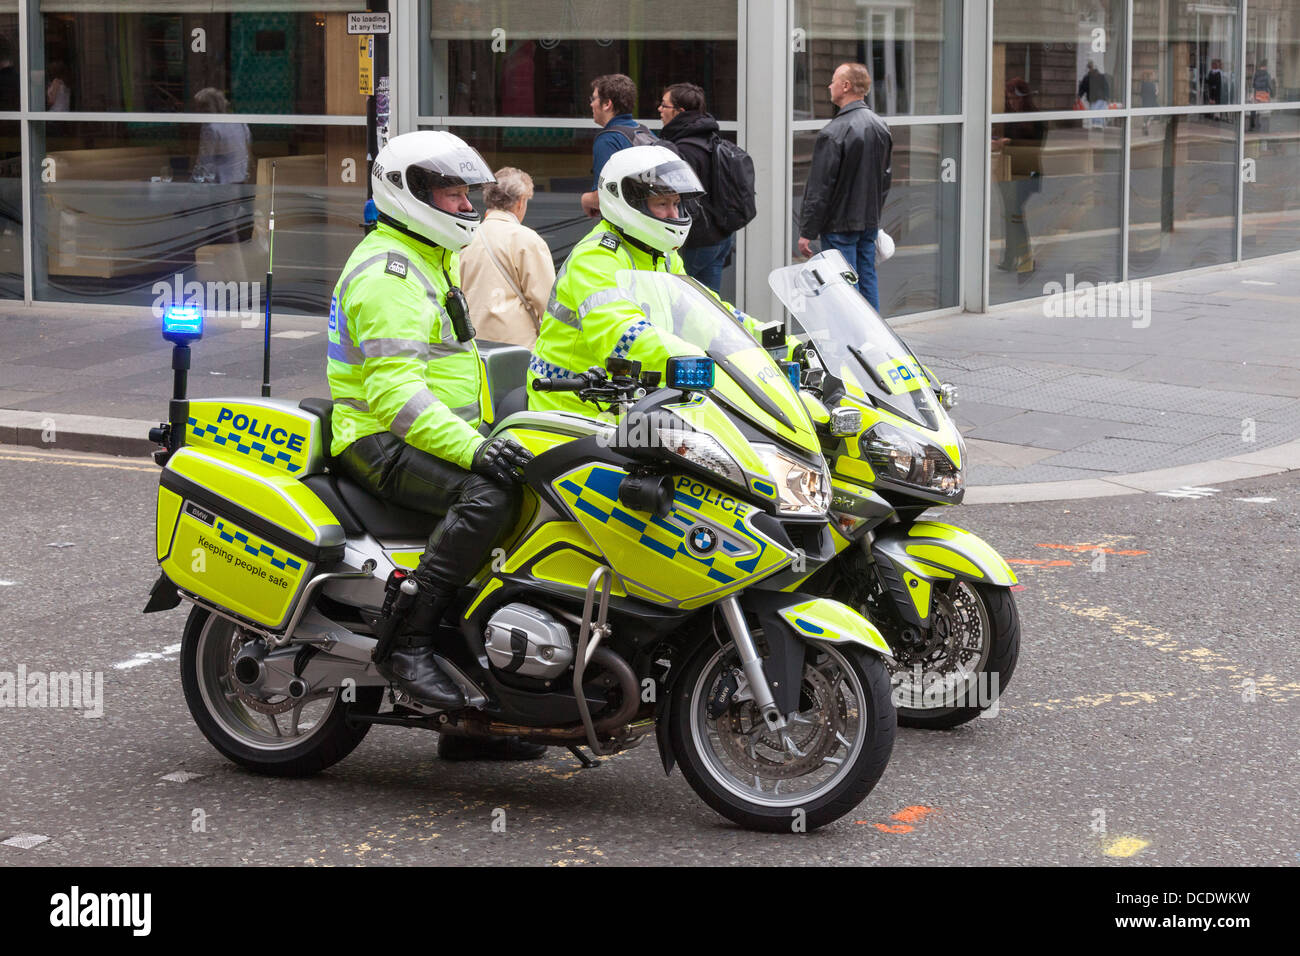 Two police motorcyclists from Police Scotland, photographed in Glasgow, Scotland, UK Stock Photo